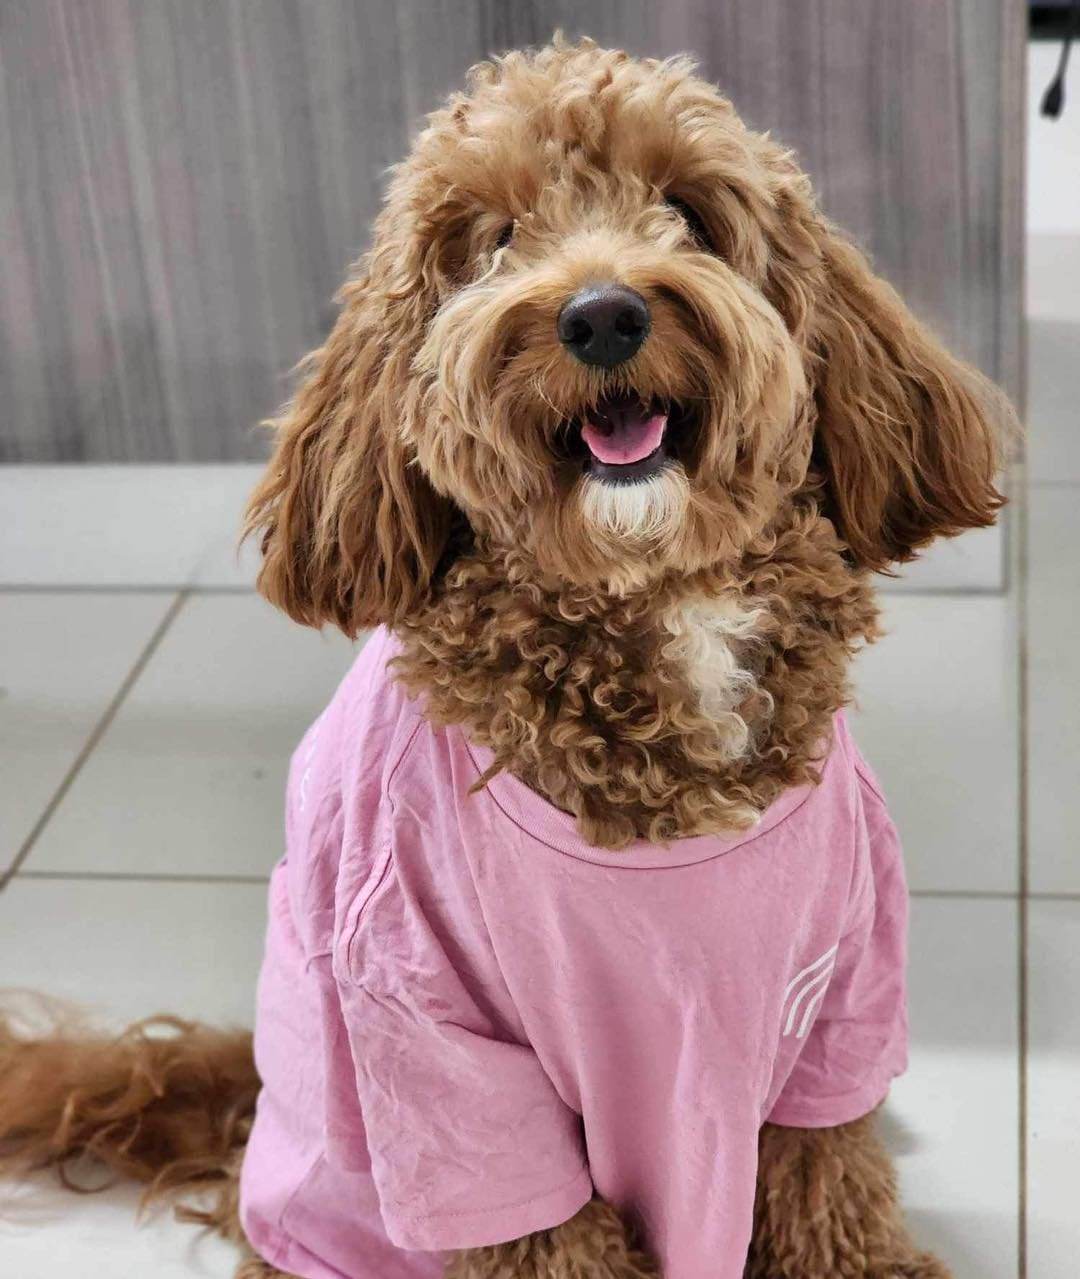 Of course our furry mascots wear pink!